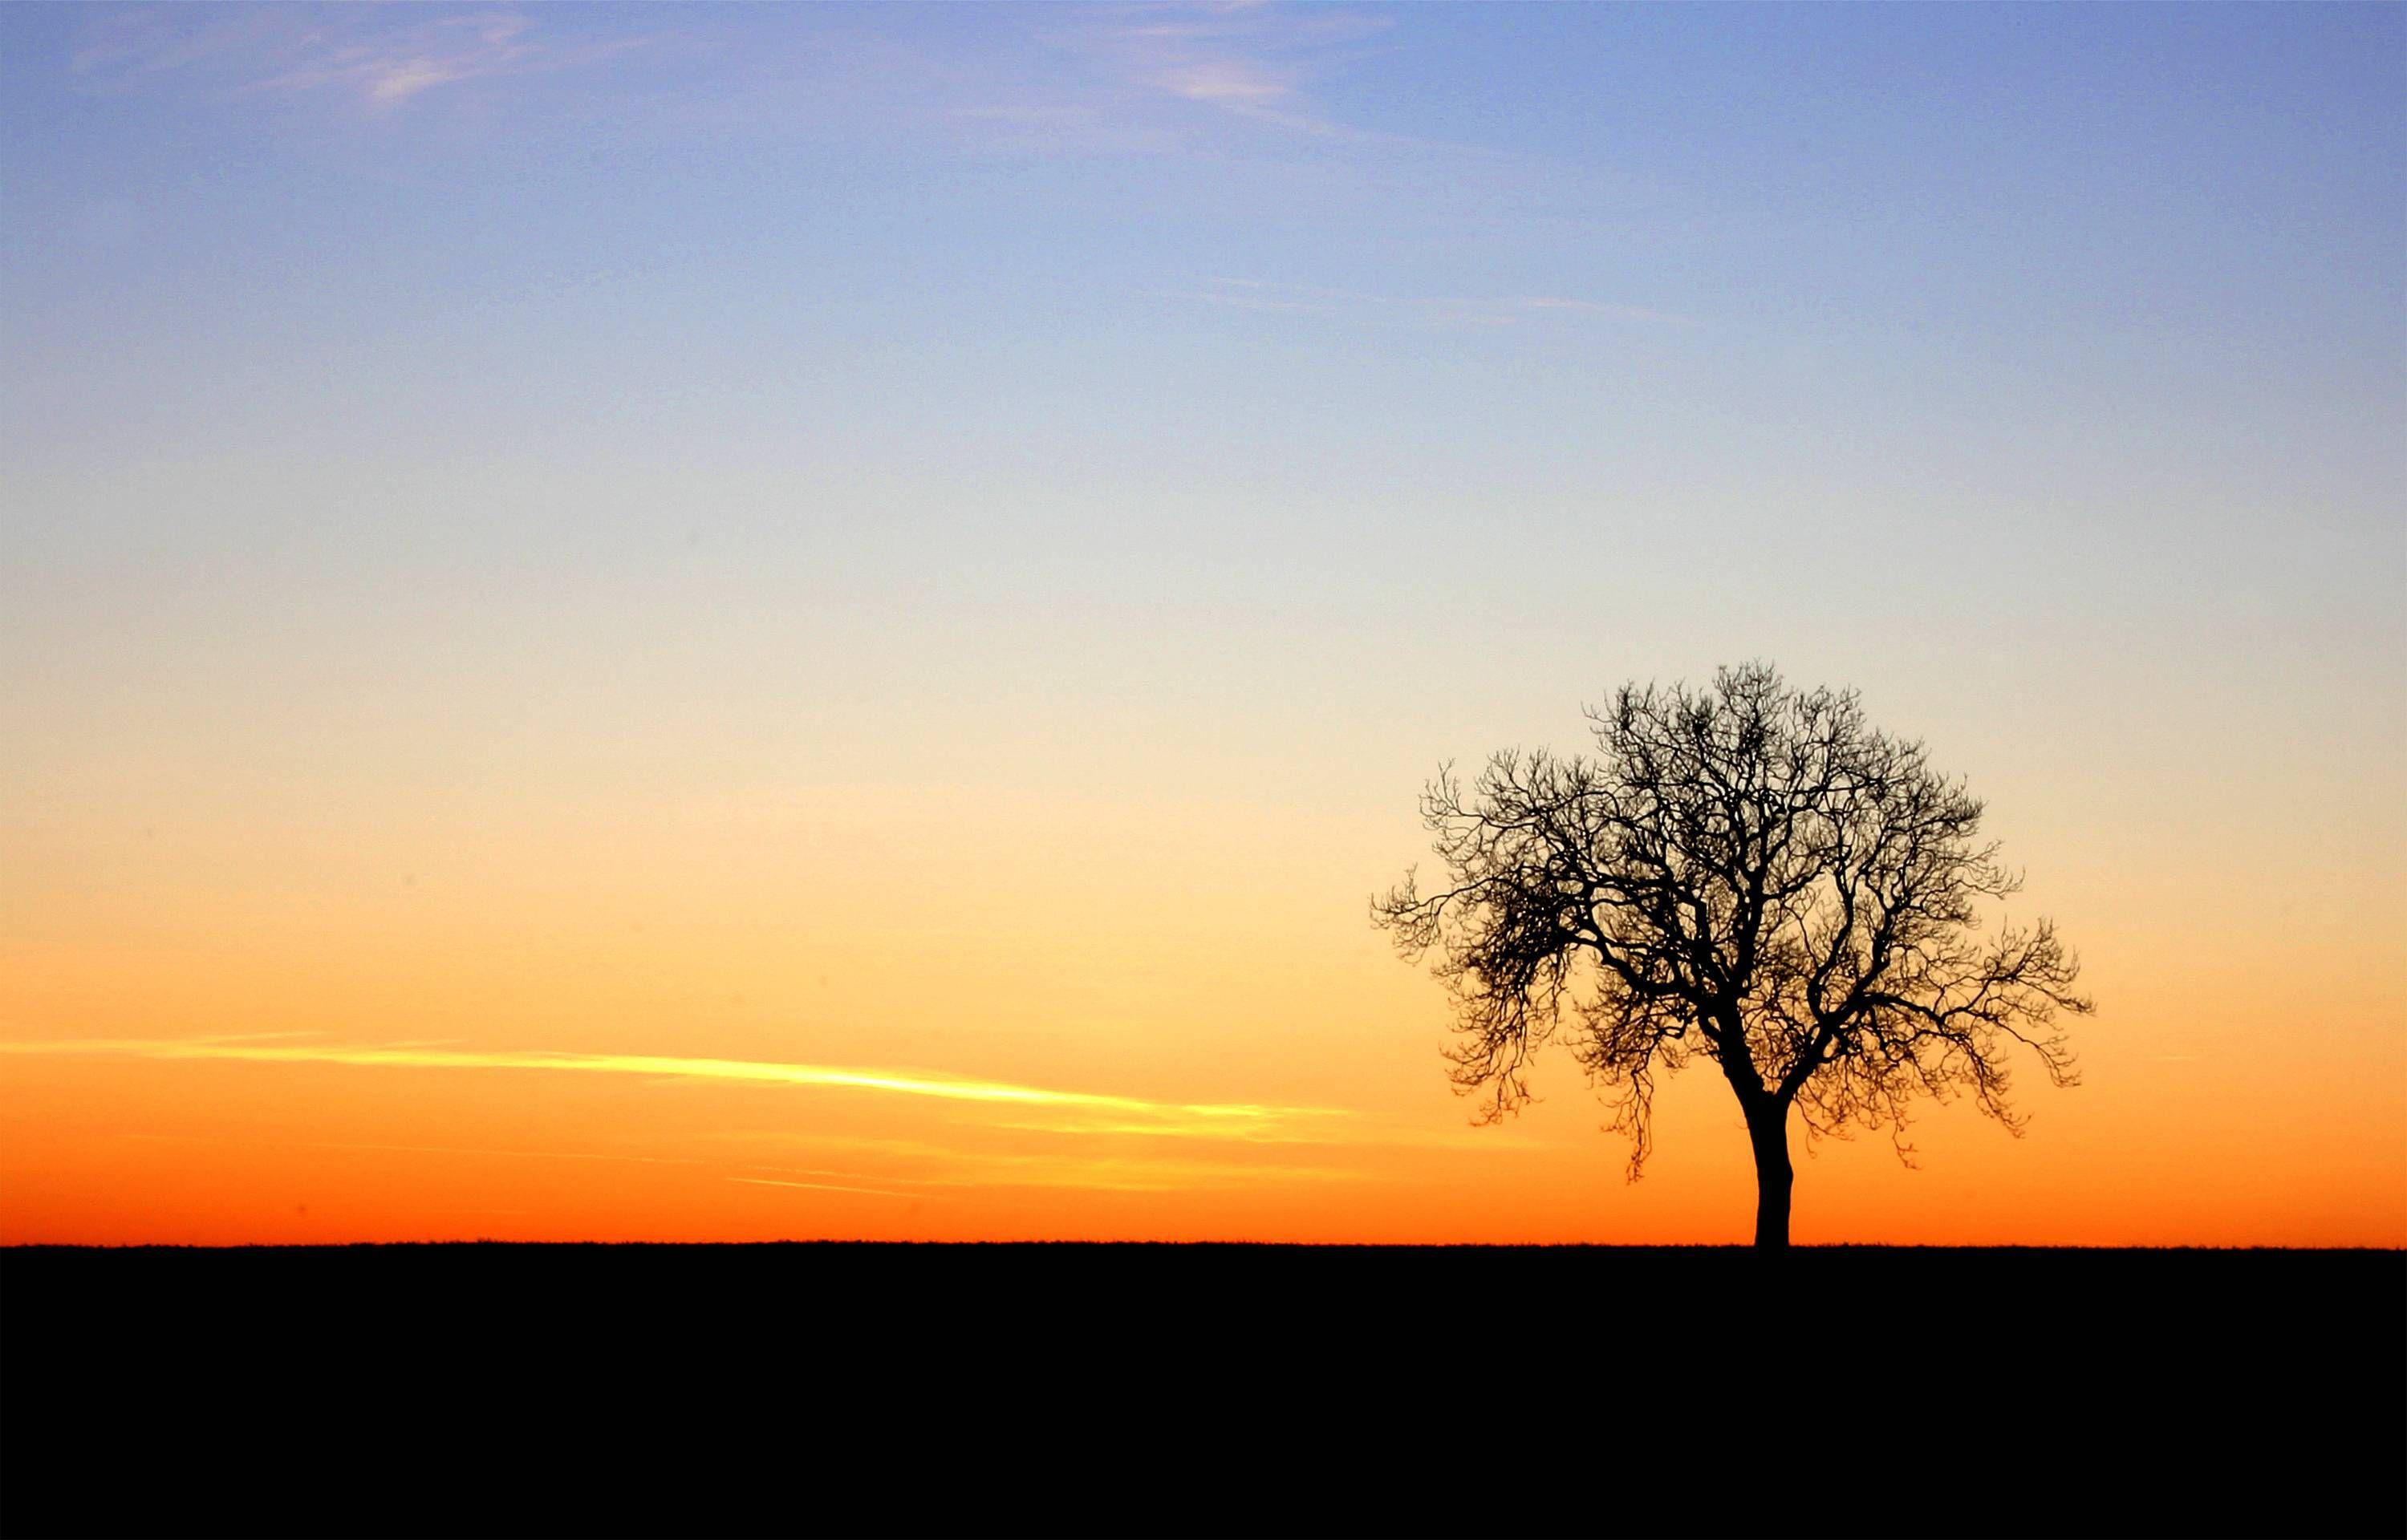 sunset tree. Ideas for paintings to teach. Tree silhouette